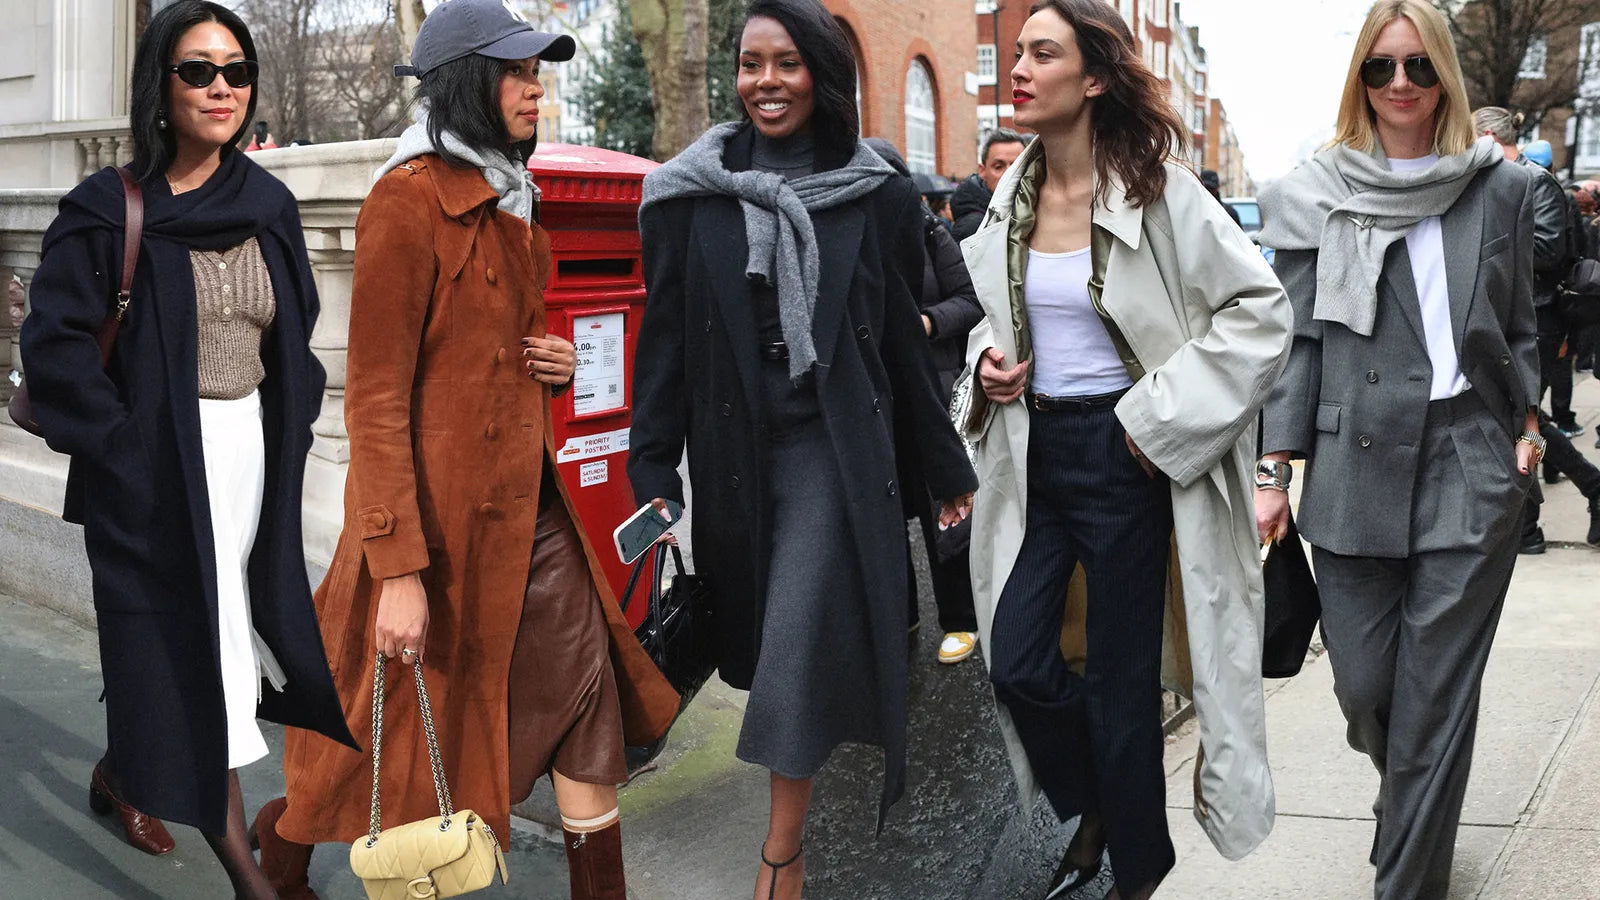 Caught Between Winter and Spring? 5 Chic Ways to Style Transitional Outerwear